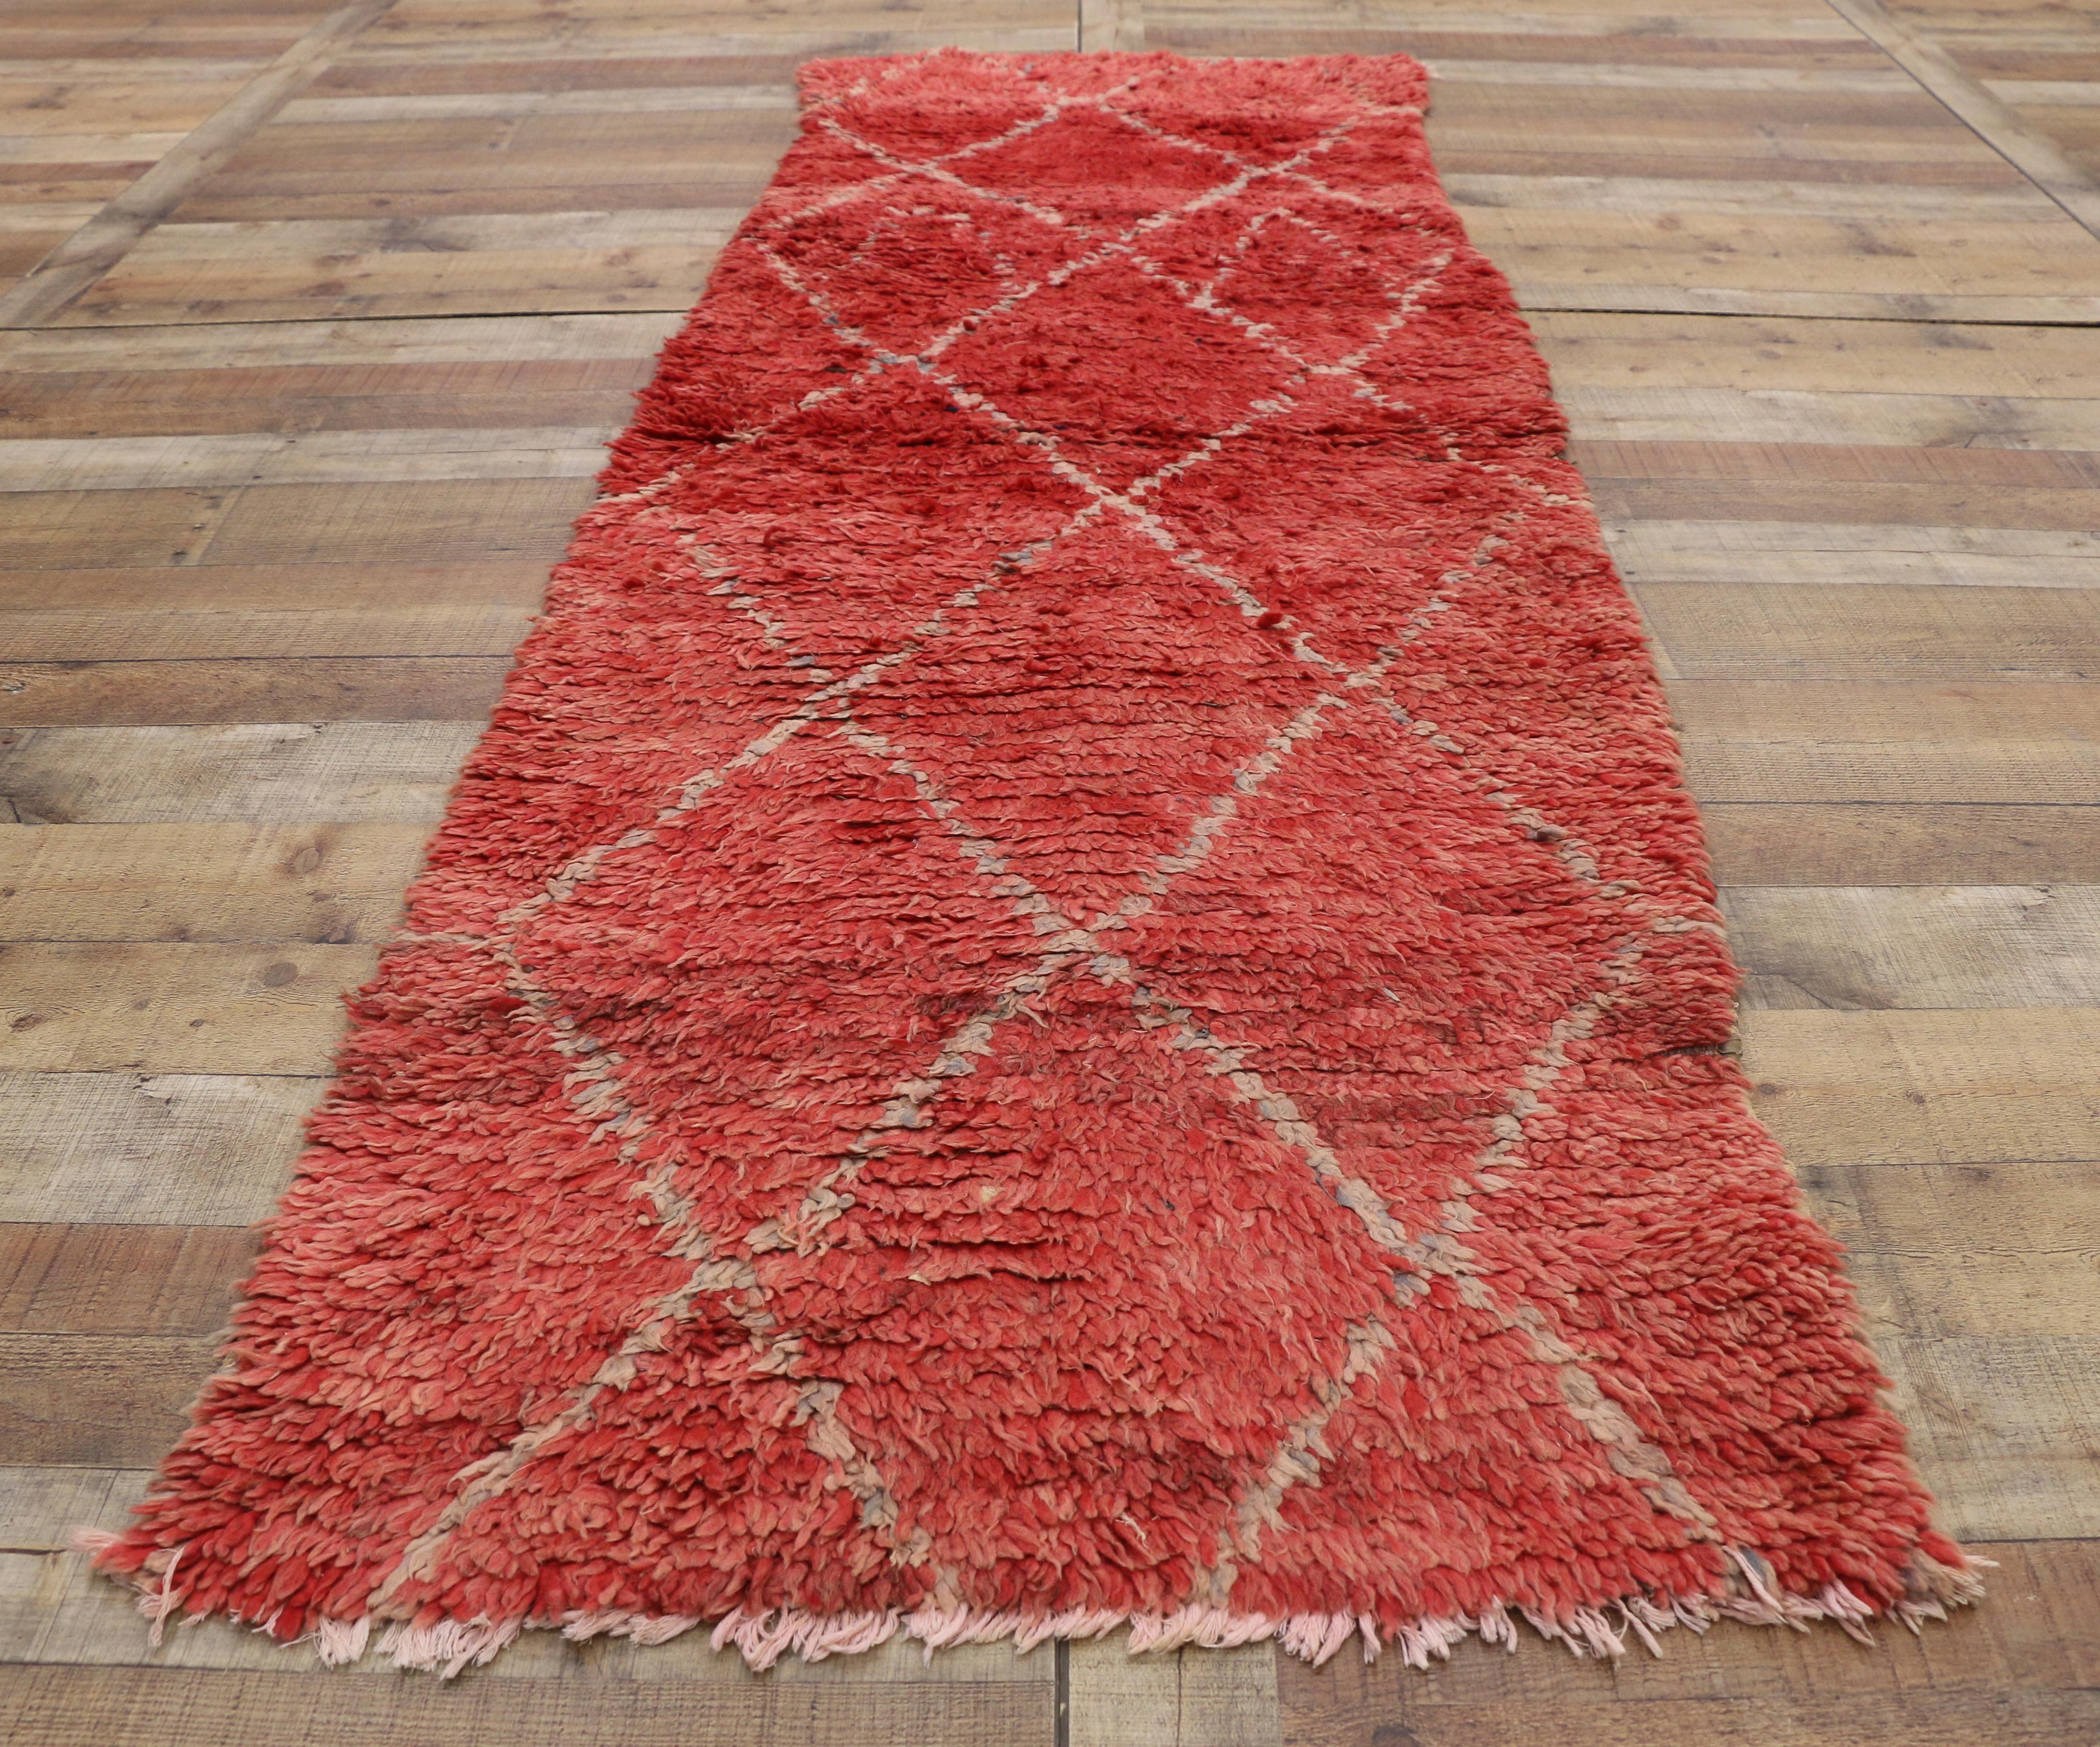 Vintage Berber Moroccan Runner with Tribal Style, Red Shag Hallway Runner 2